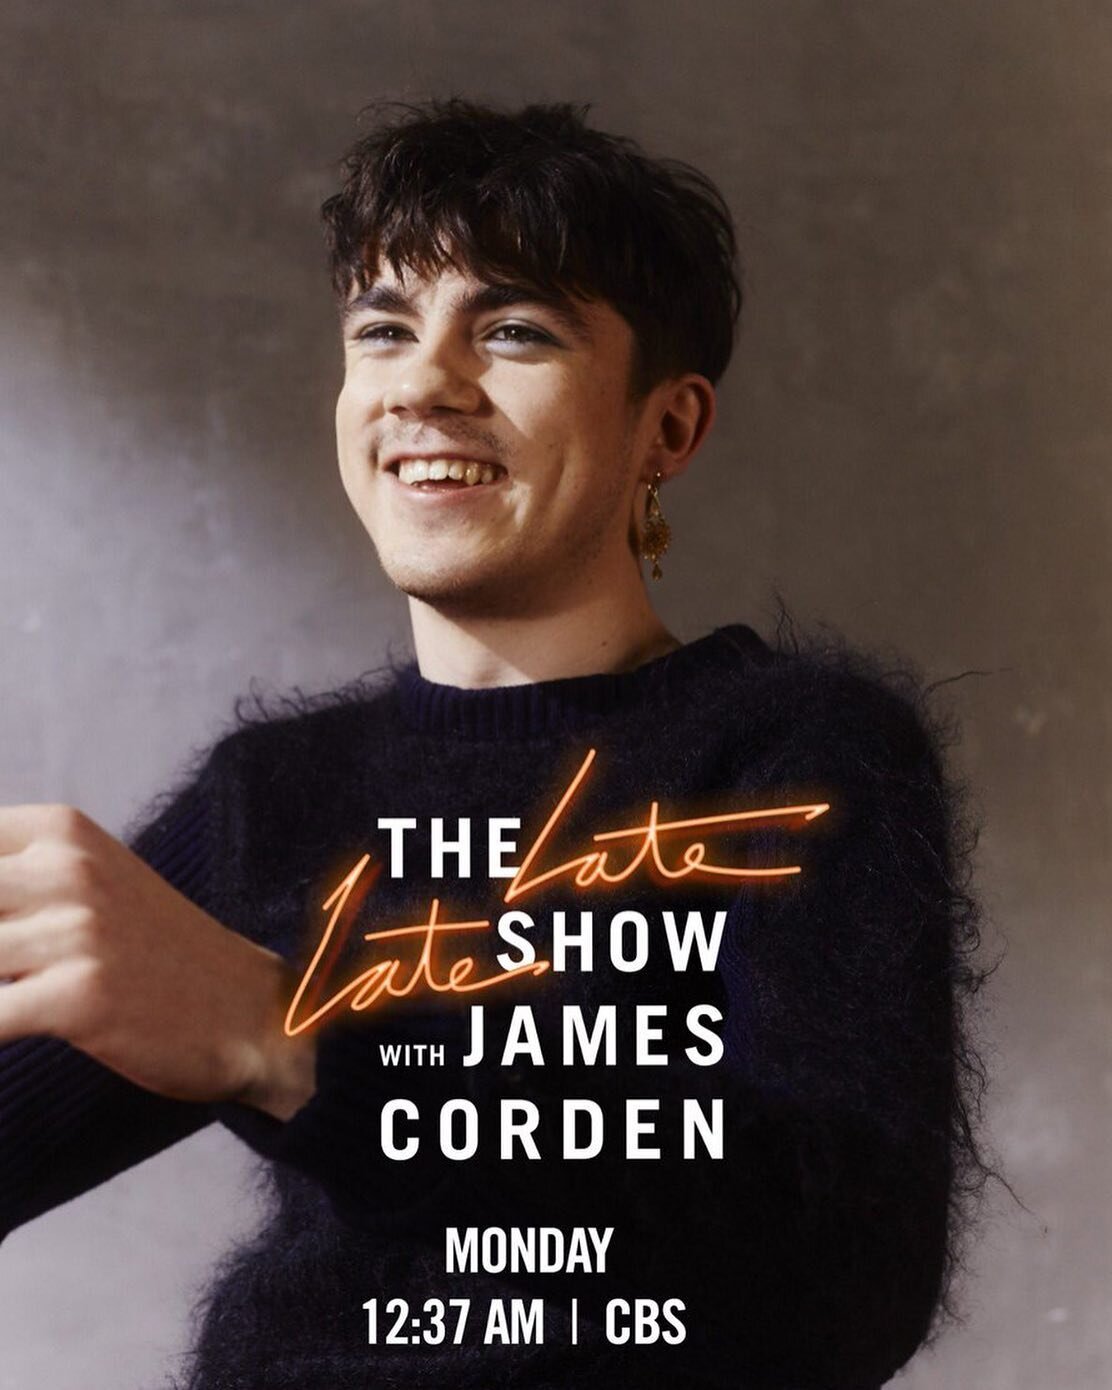 Check out young Declan directed live for James Corden&rsquo;s Late Late Show ⭐️🎥🚀🌍🛰👩🏿&zwj;🚀🧑🏻&zwj;🚀☄️ #declanmckenna